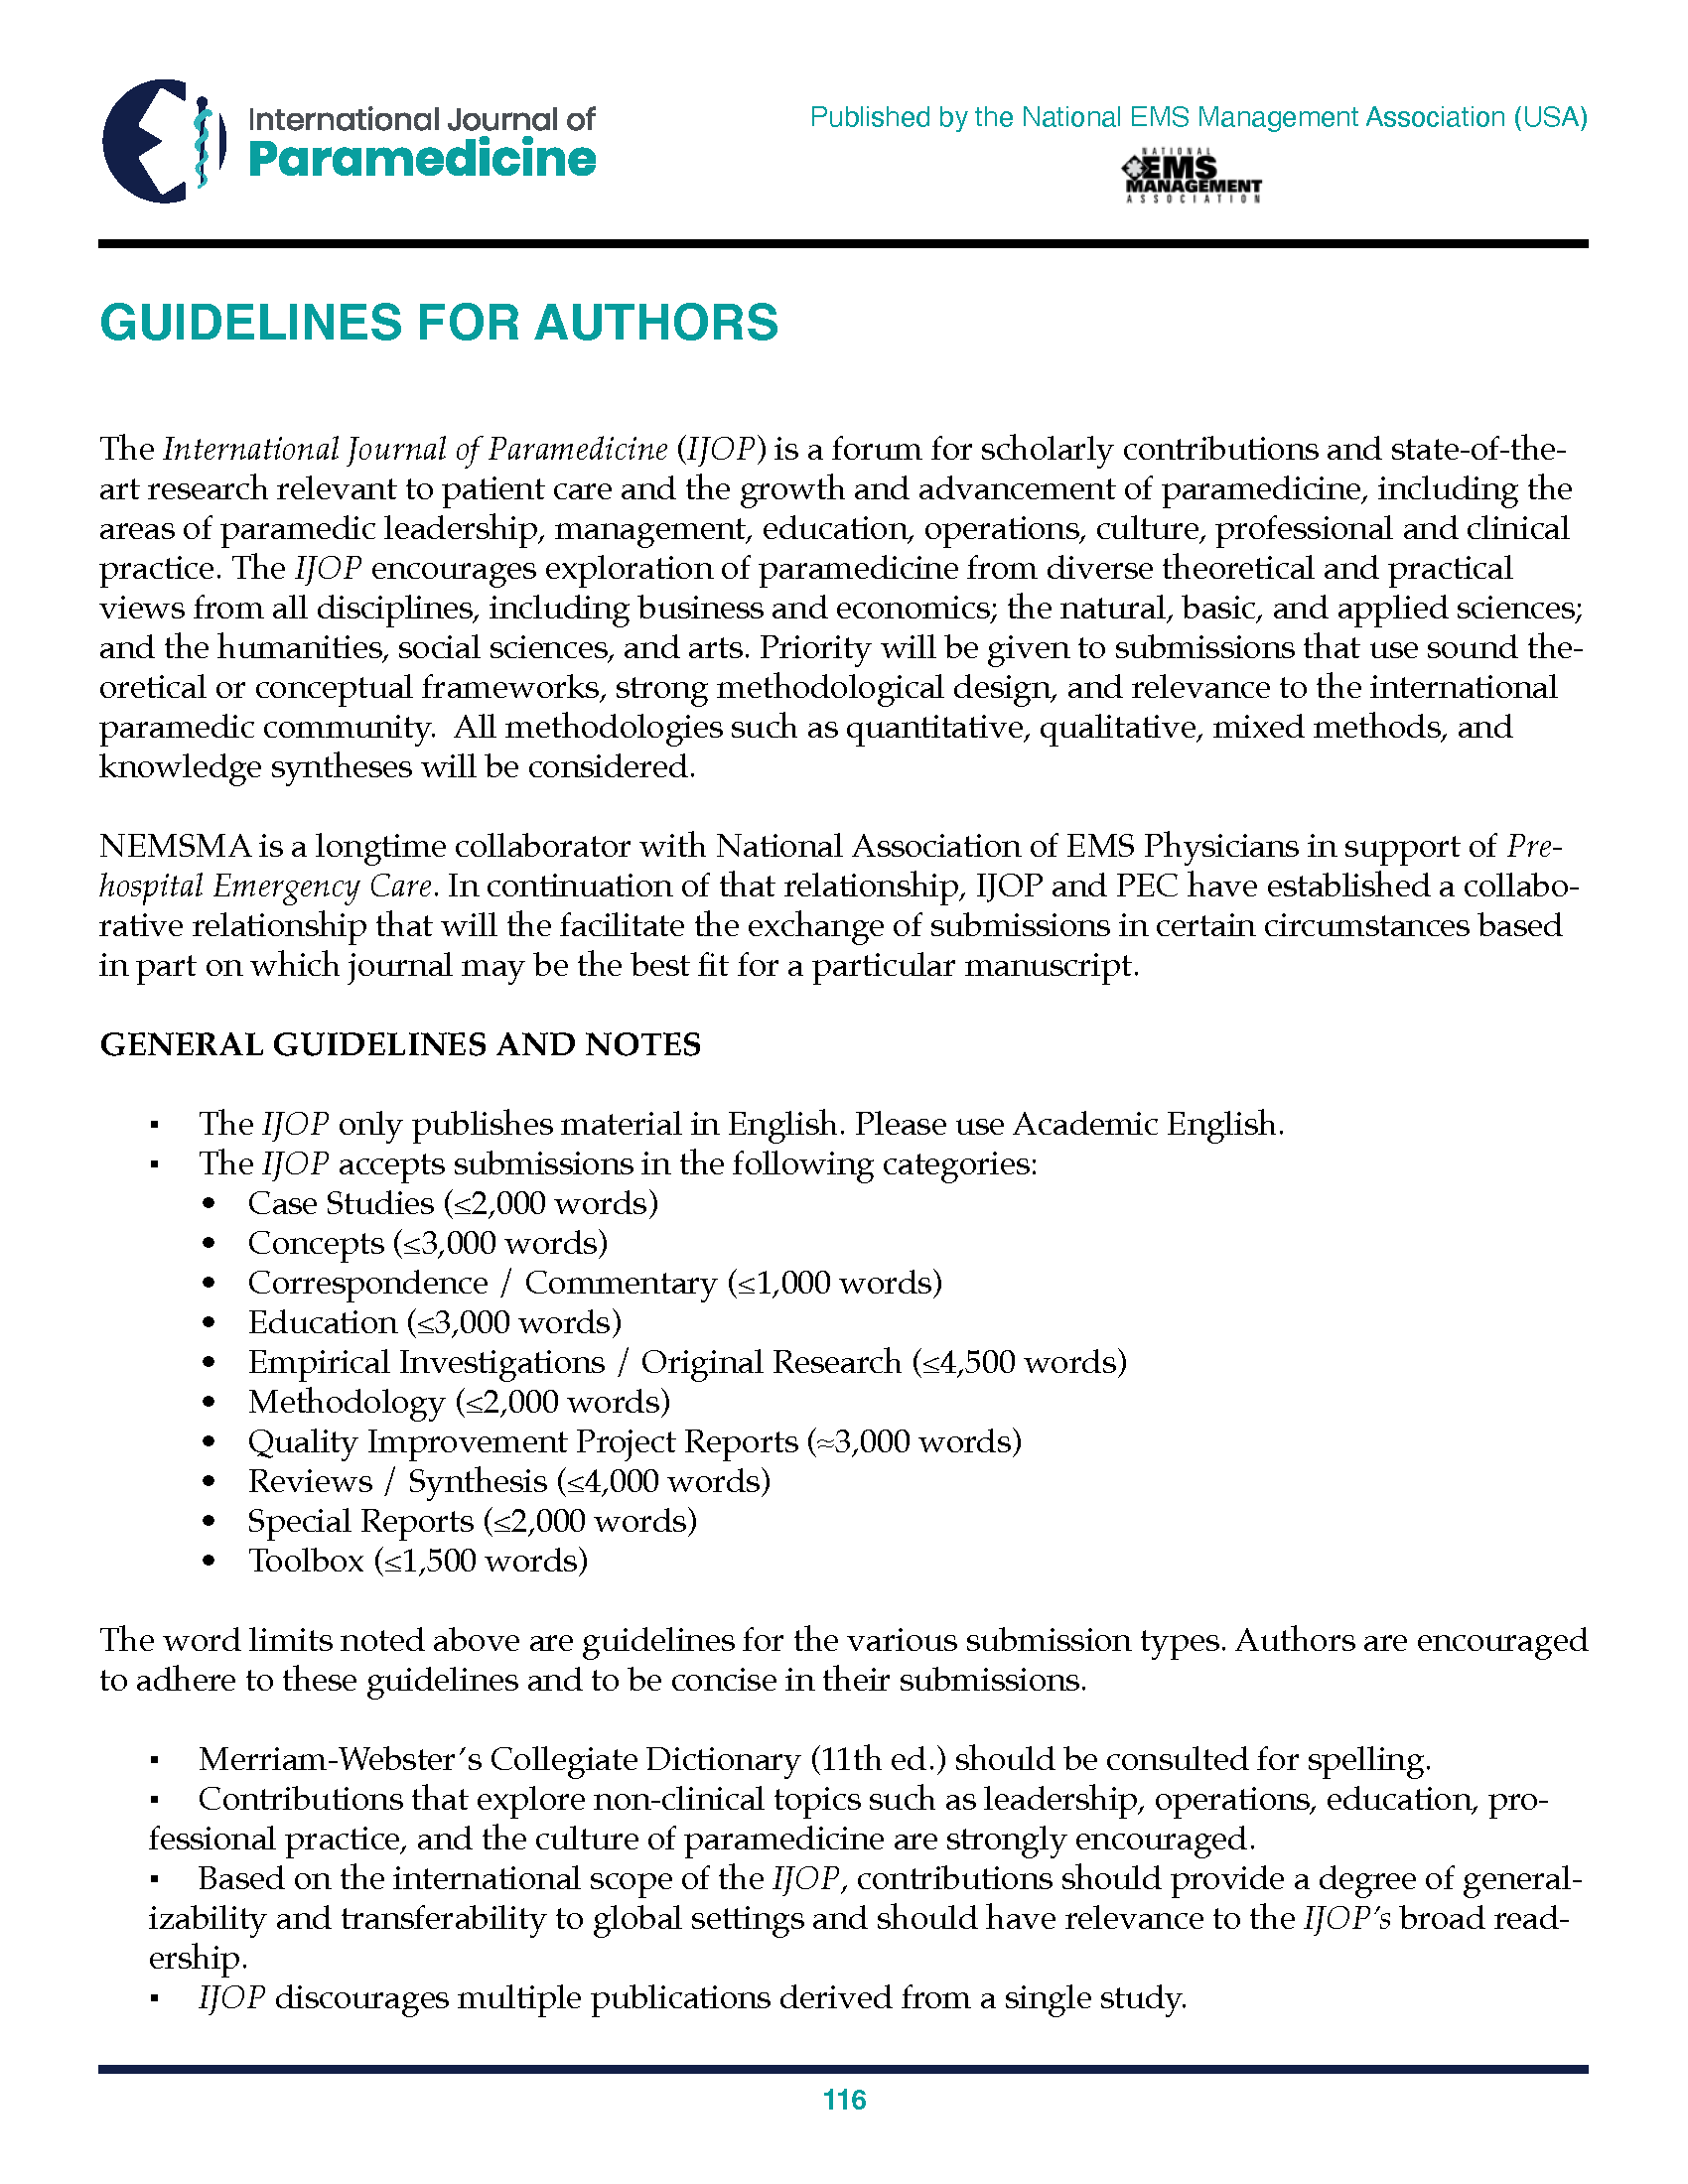 Guidelines for Authors - page image